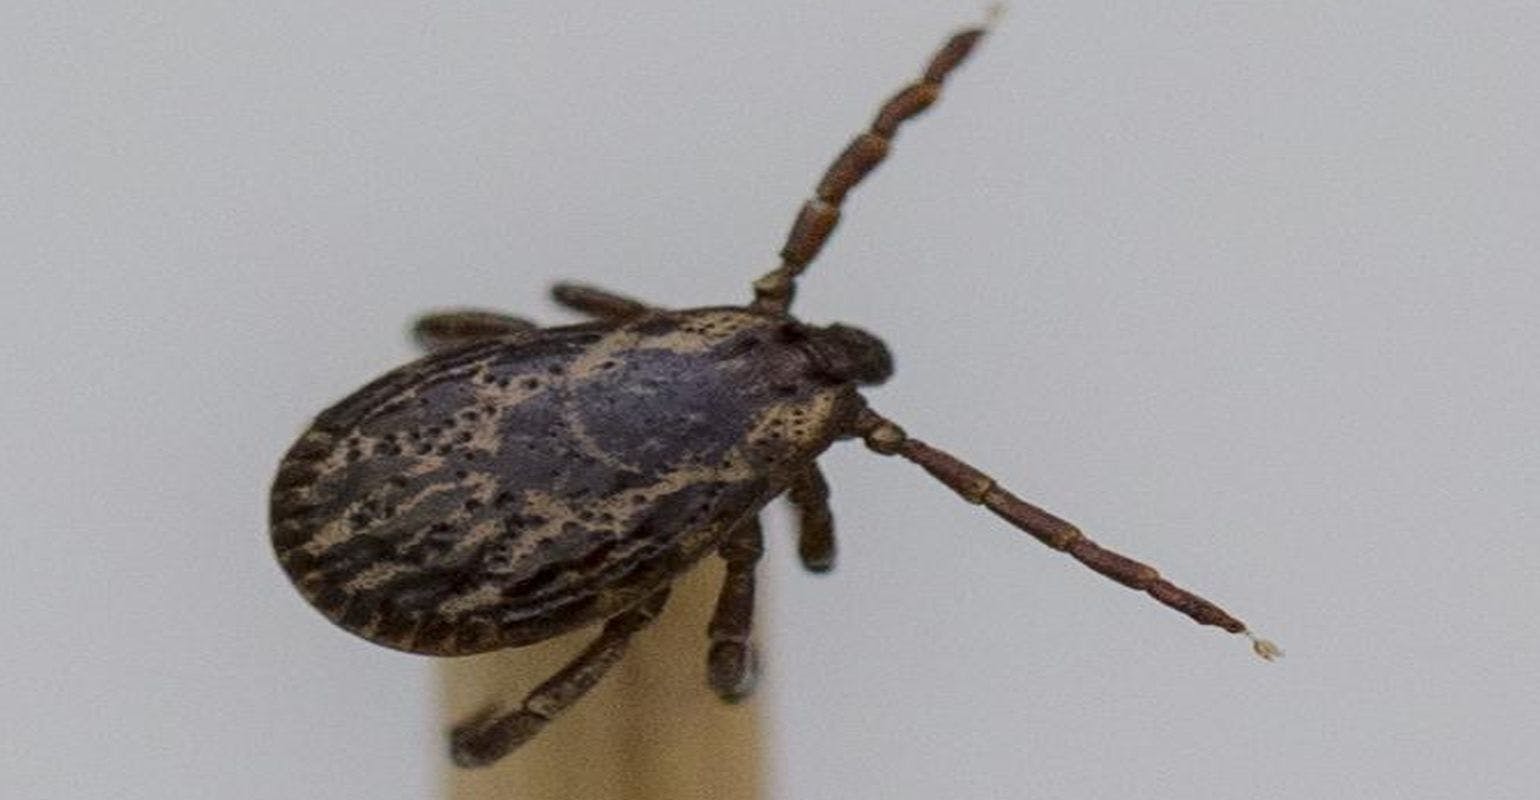 Hungry Ticks Work Harder to Find You